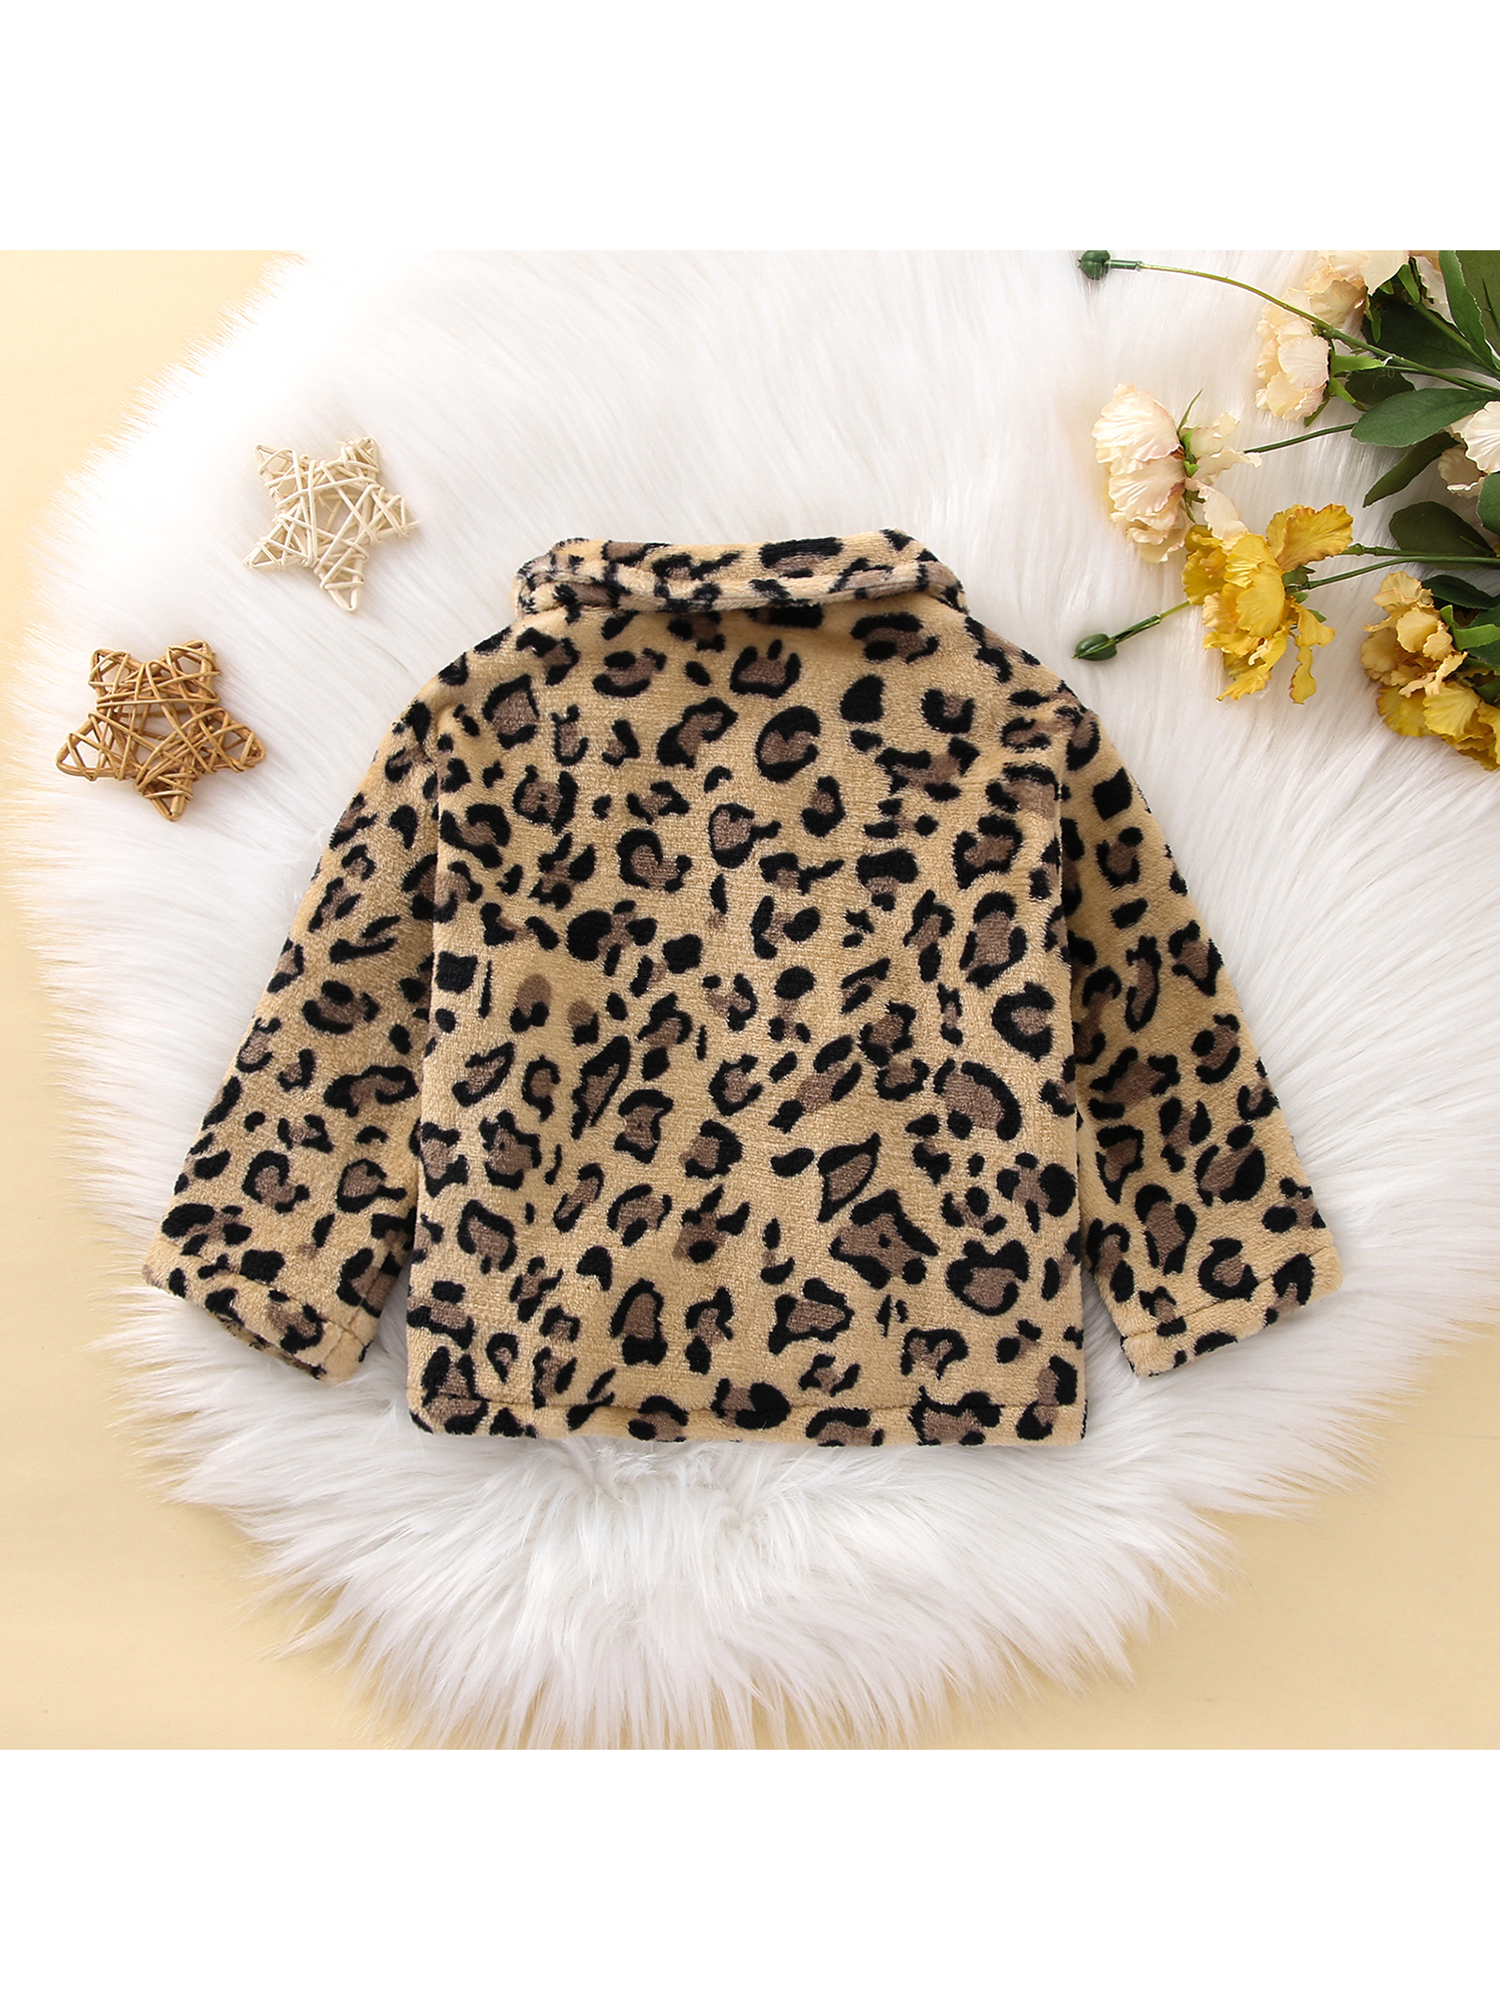 One opening Toddler Baby Winter Jacket Fashion Long Sleeve Leopard Print Button Down Plush Coat - image 3 of 9